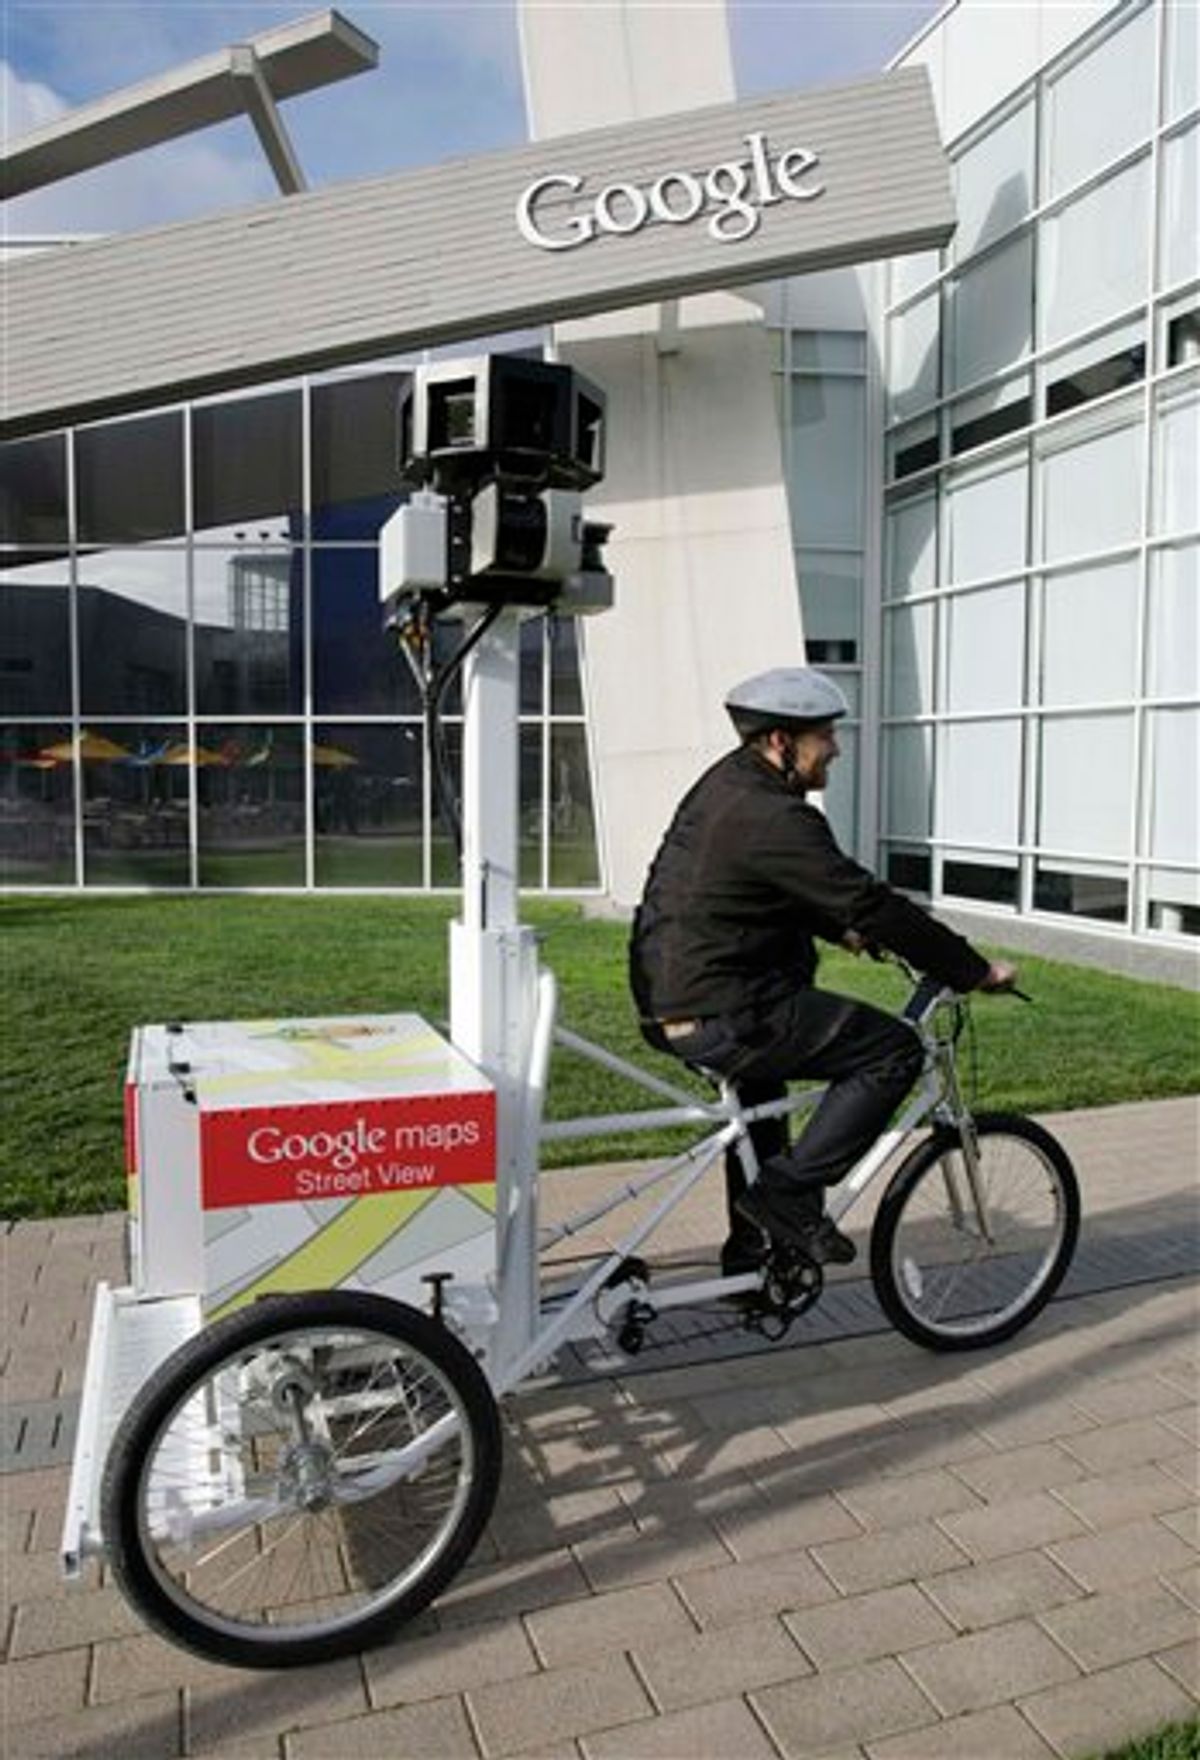 In this photo taken March 7, 2011, Matt Potter of Google pedals Goggle's new Street View Tricycle at Google headquarters in Mountain View, Calif. France's privacy watchdog has handed down its largest fine ever against Google Monday, March 21, 2011, for improperly gathering and storing potentially sensitive data from Wi-Fi networks for its Street View application. (AP Photo/Paul Sakuma) (AP)